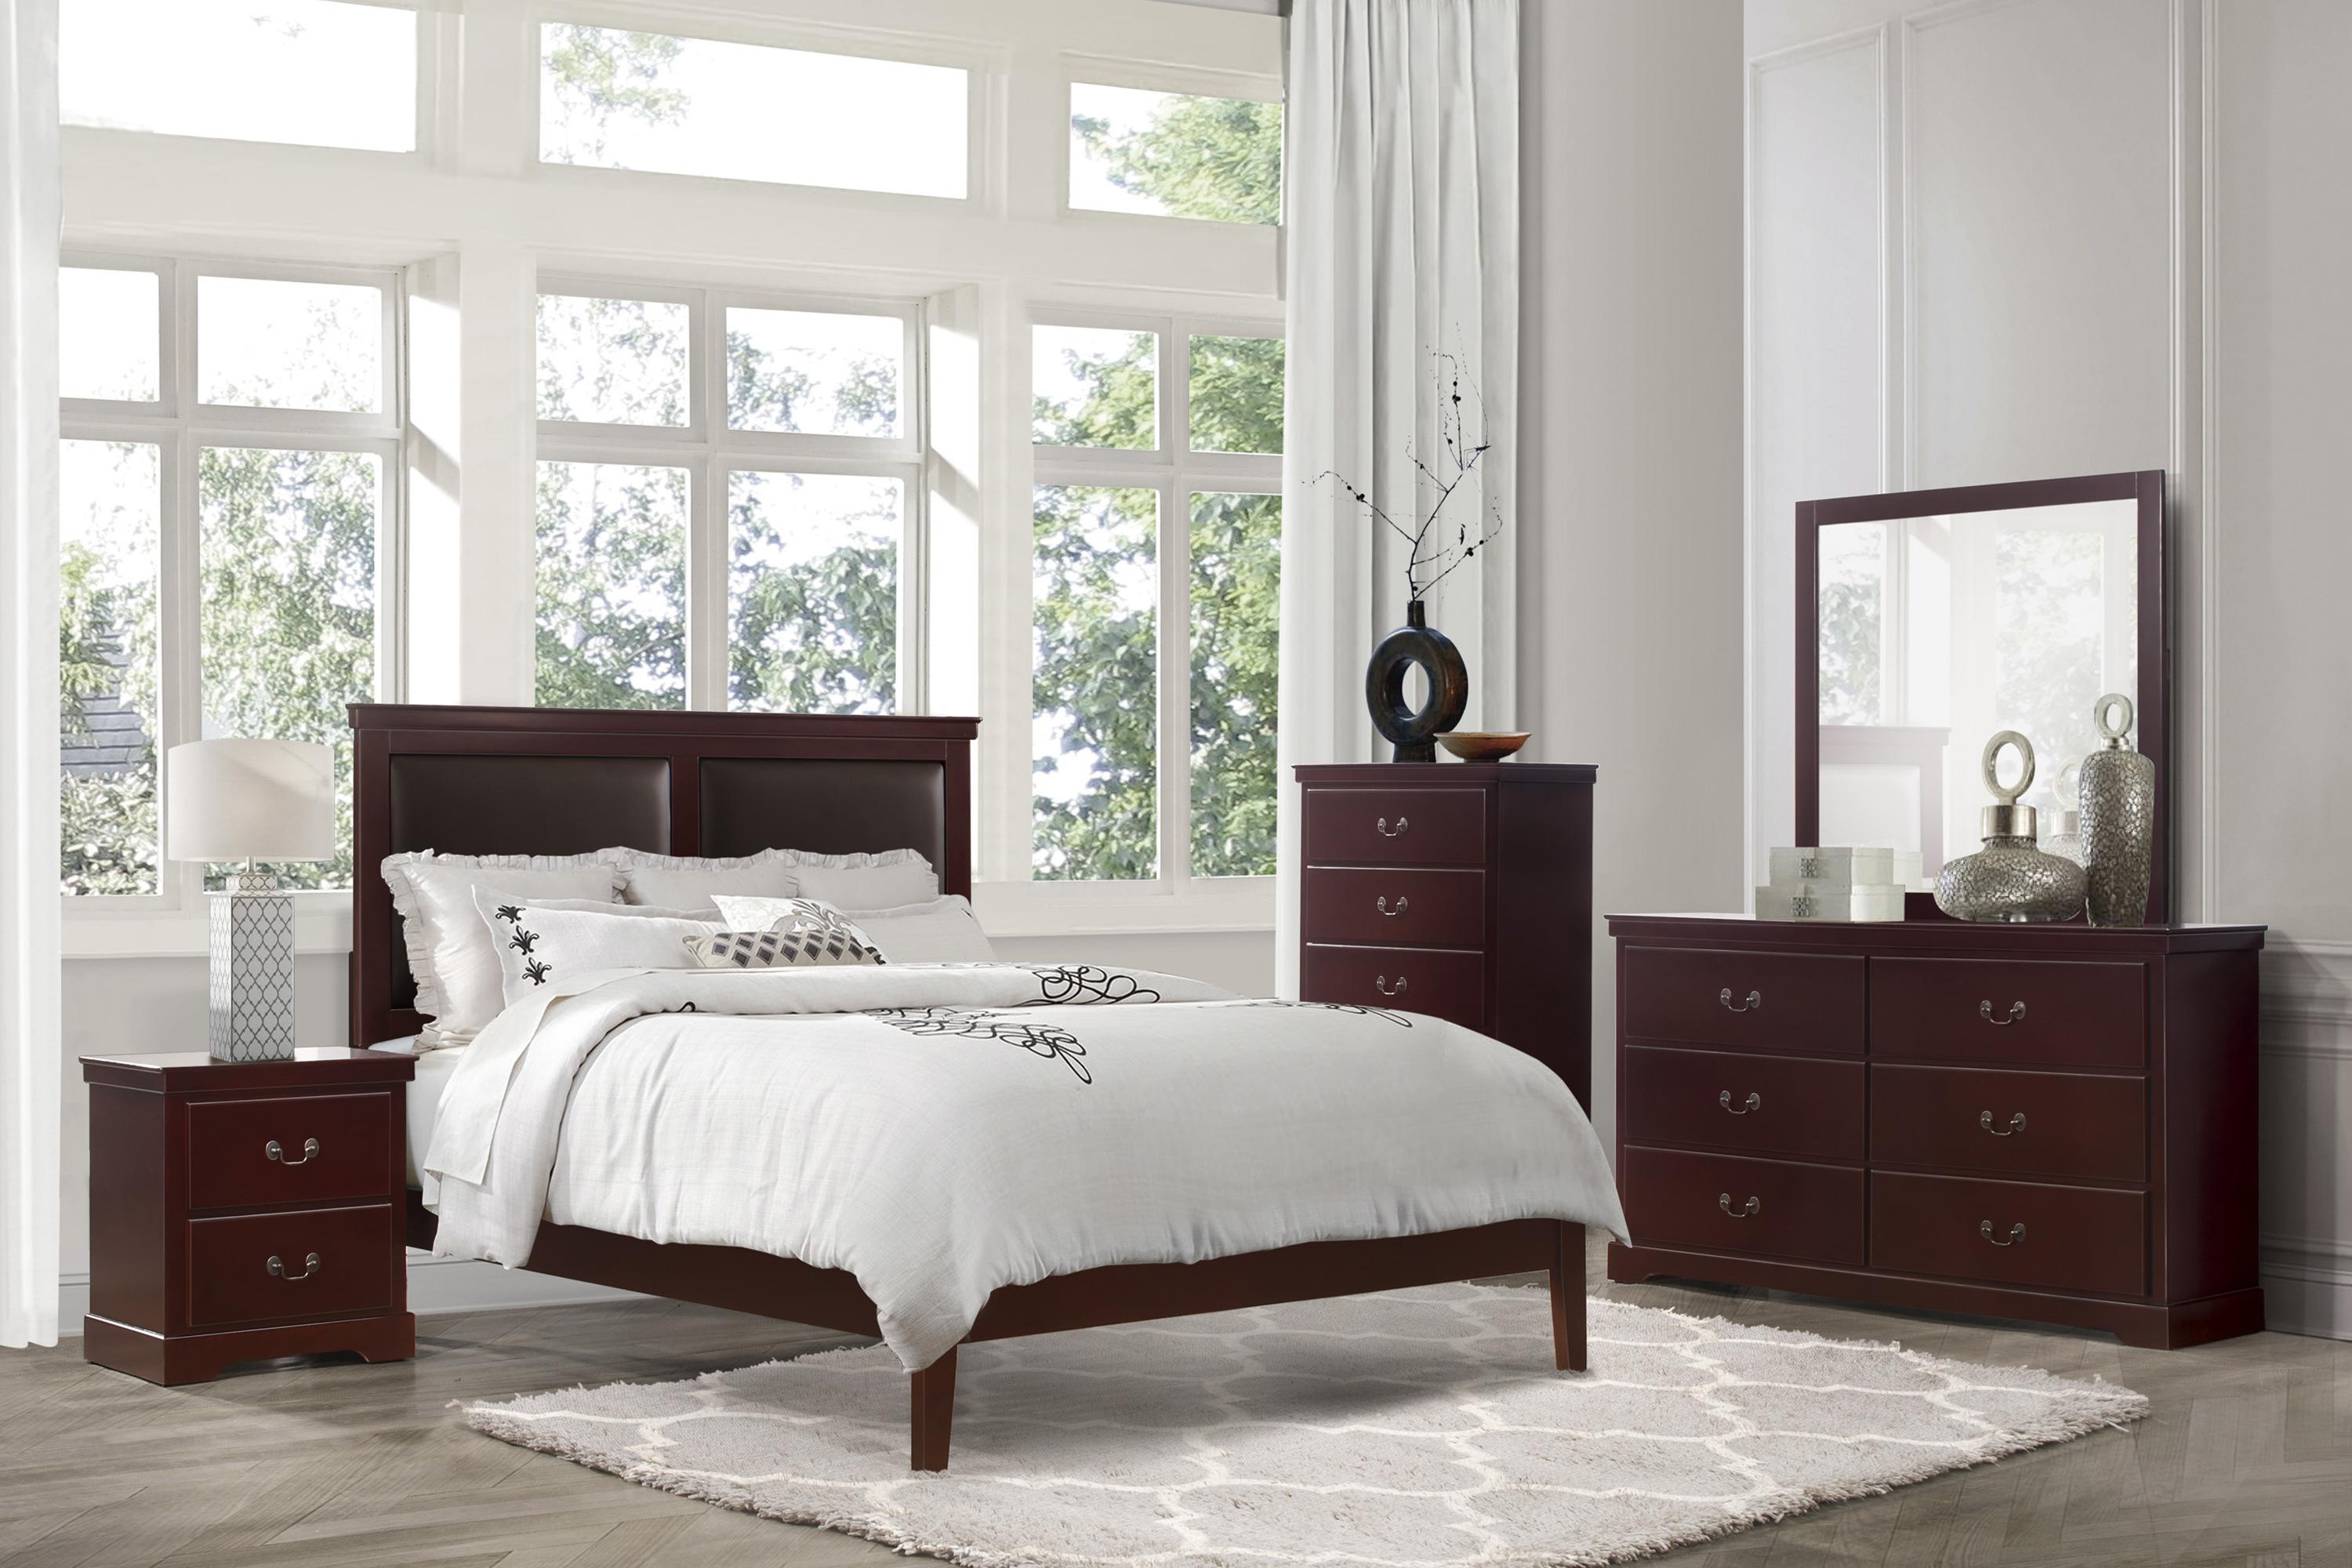 Modern Bedroom Set 1519CHF-1-6PC Seabright 1519CHF-1-6PC in Cherry Faux Leather